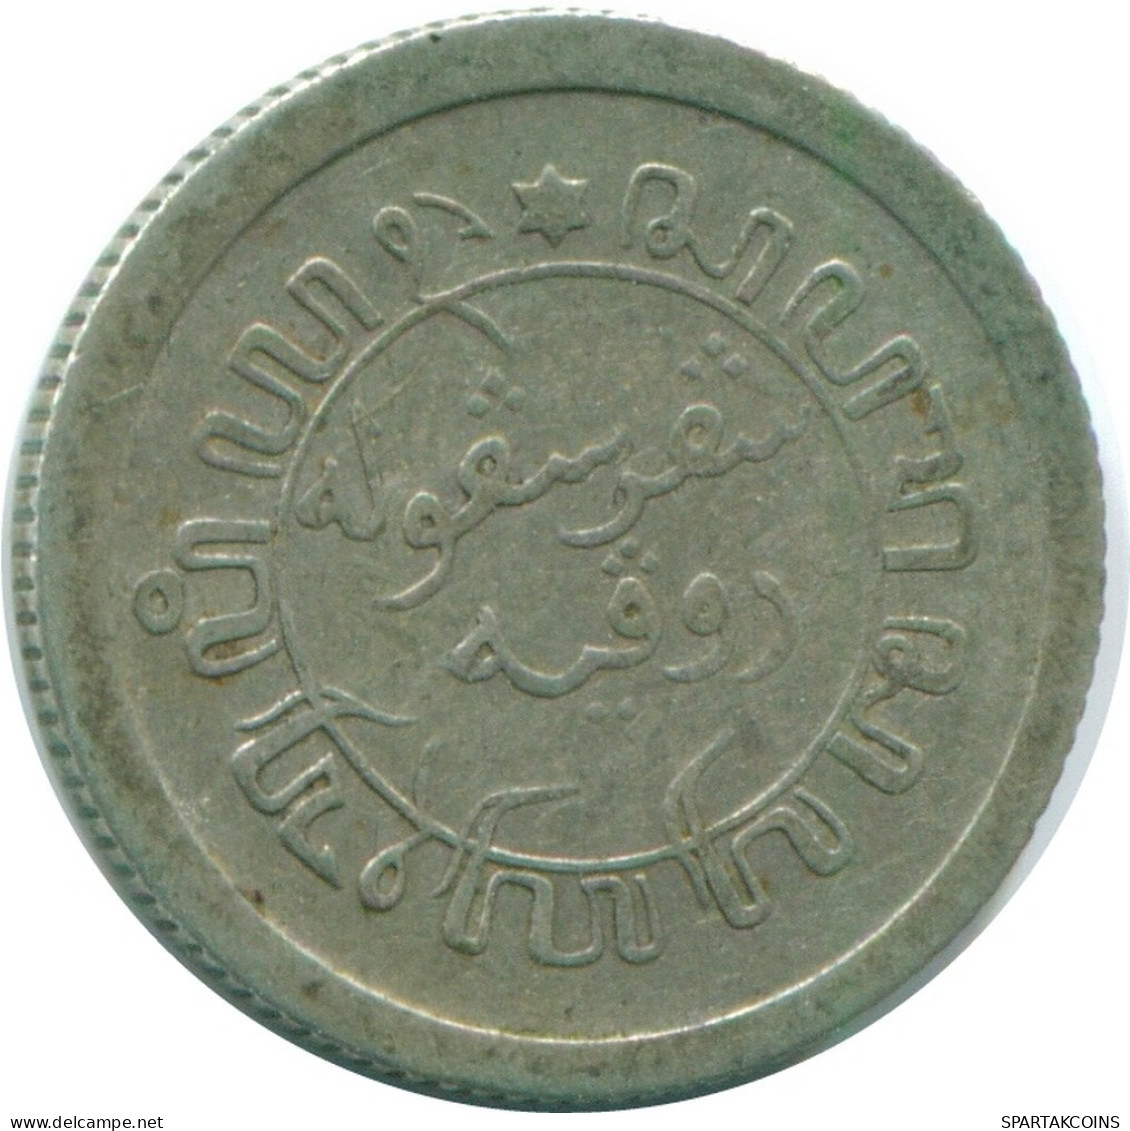 1/10 GULDEN 1920 NETHERLANDS EAST INDIES SILVER Colonial Coin #NL13373.3.U.A - Dutch East Indies